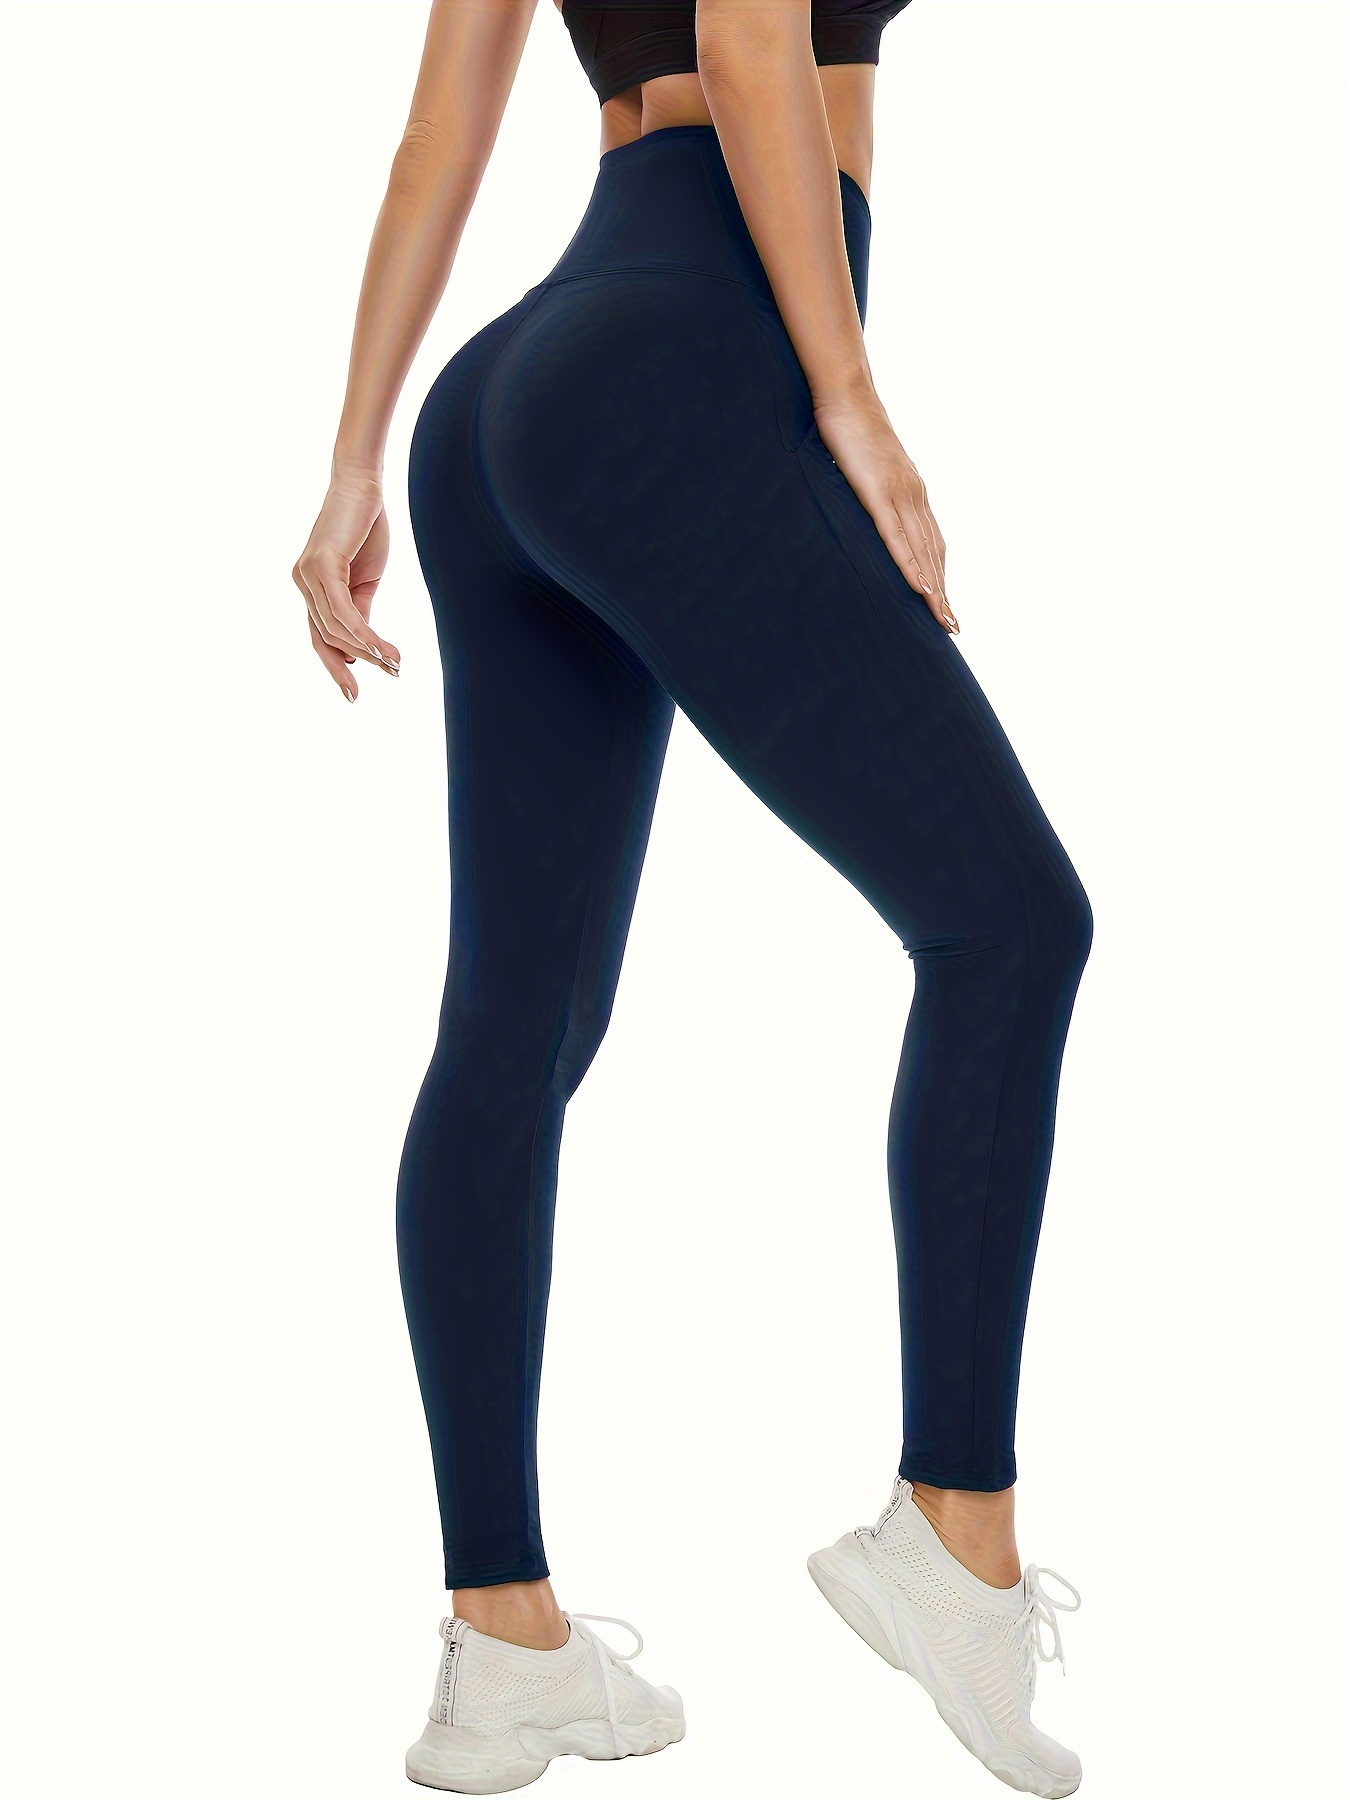 Solid Color V Cross Waist Sports Leggings With Pockets For Women, Tummy  Control Soft Workout Running High Waisted Non See Through Yoga Pants,  Women's